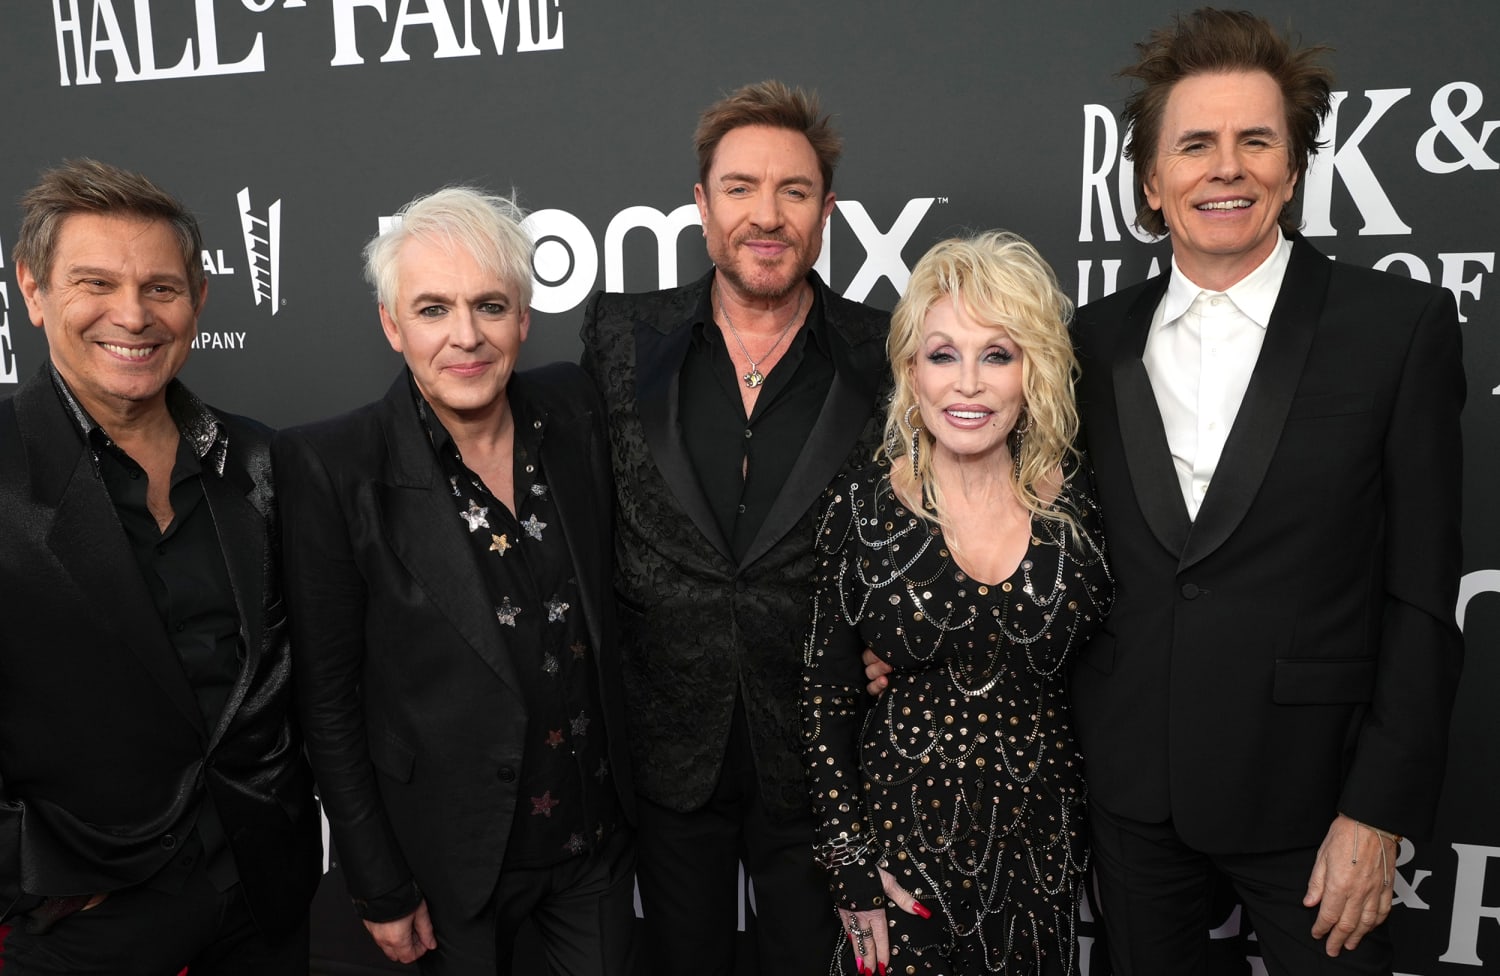 Dolly Parton Crashes Duran Duran's Rock & Roll Hall of Fame Interview